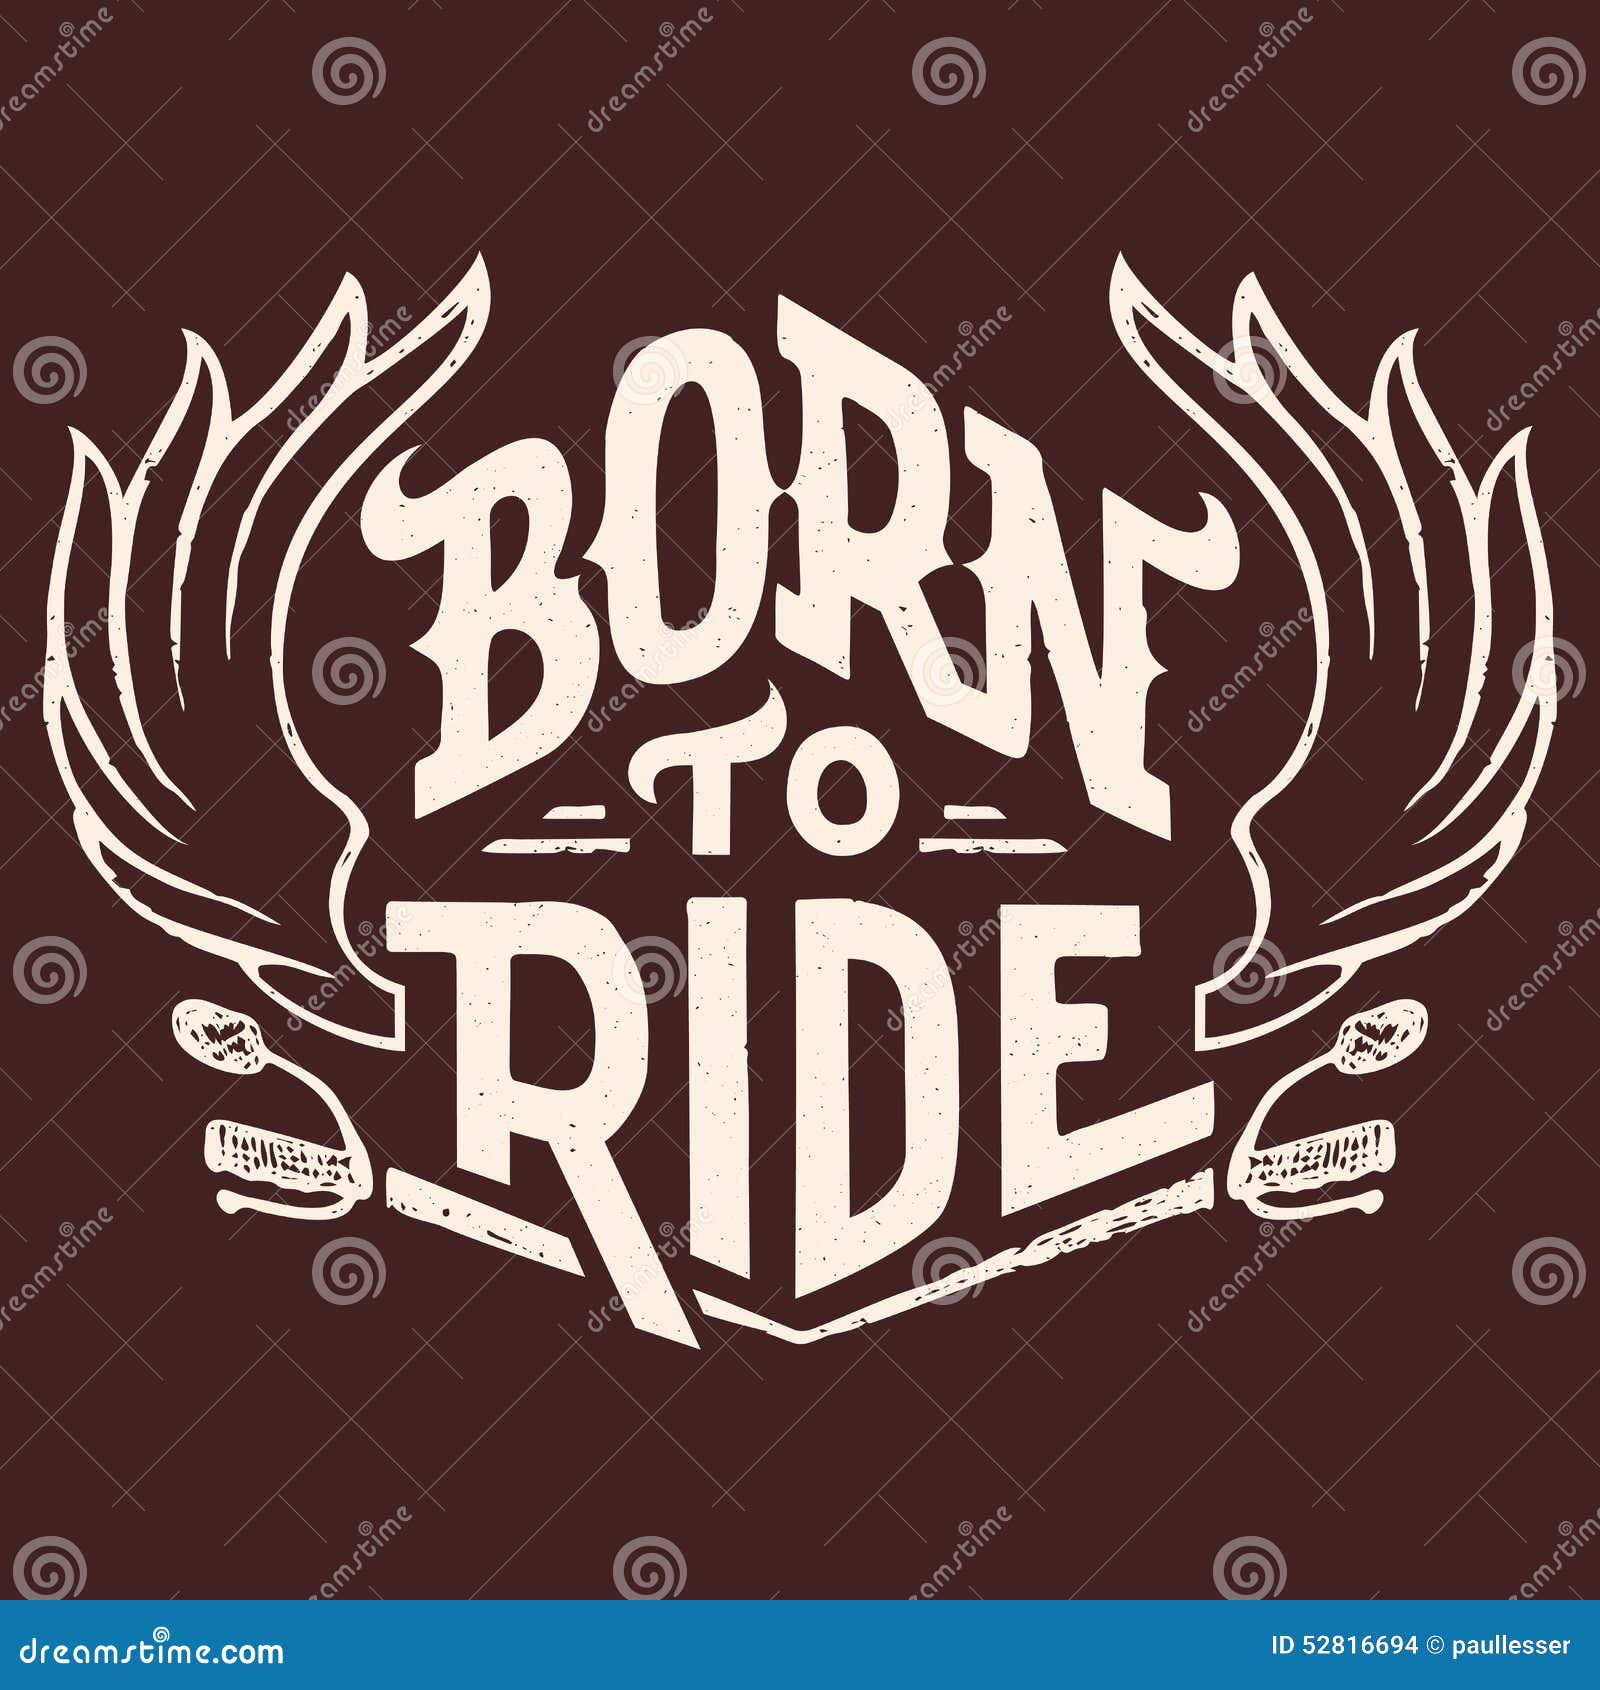 born to ride t-shirt 